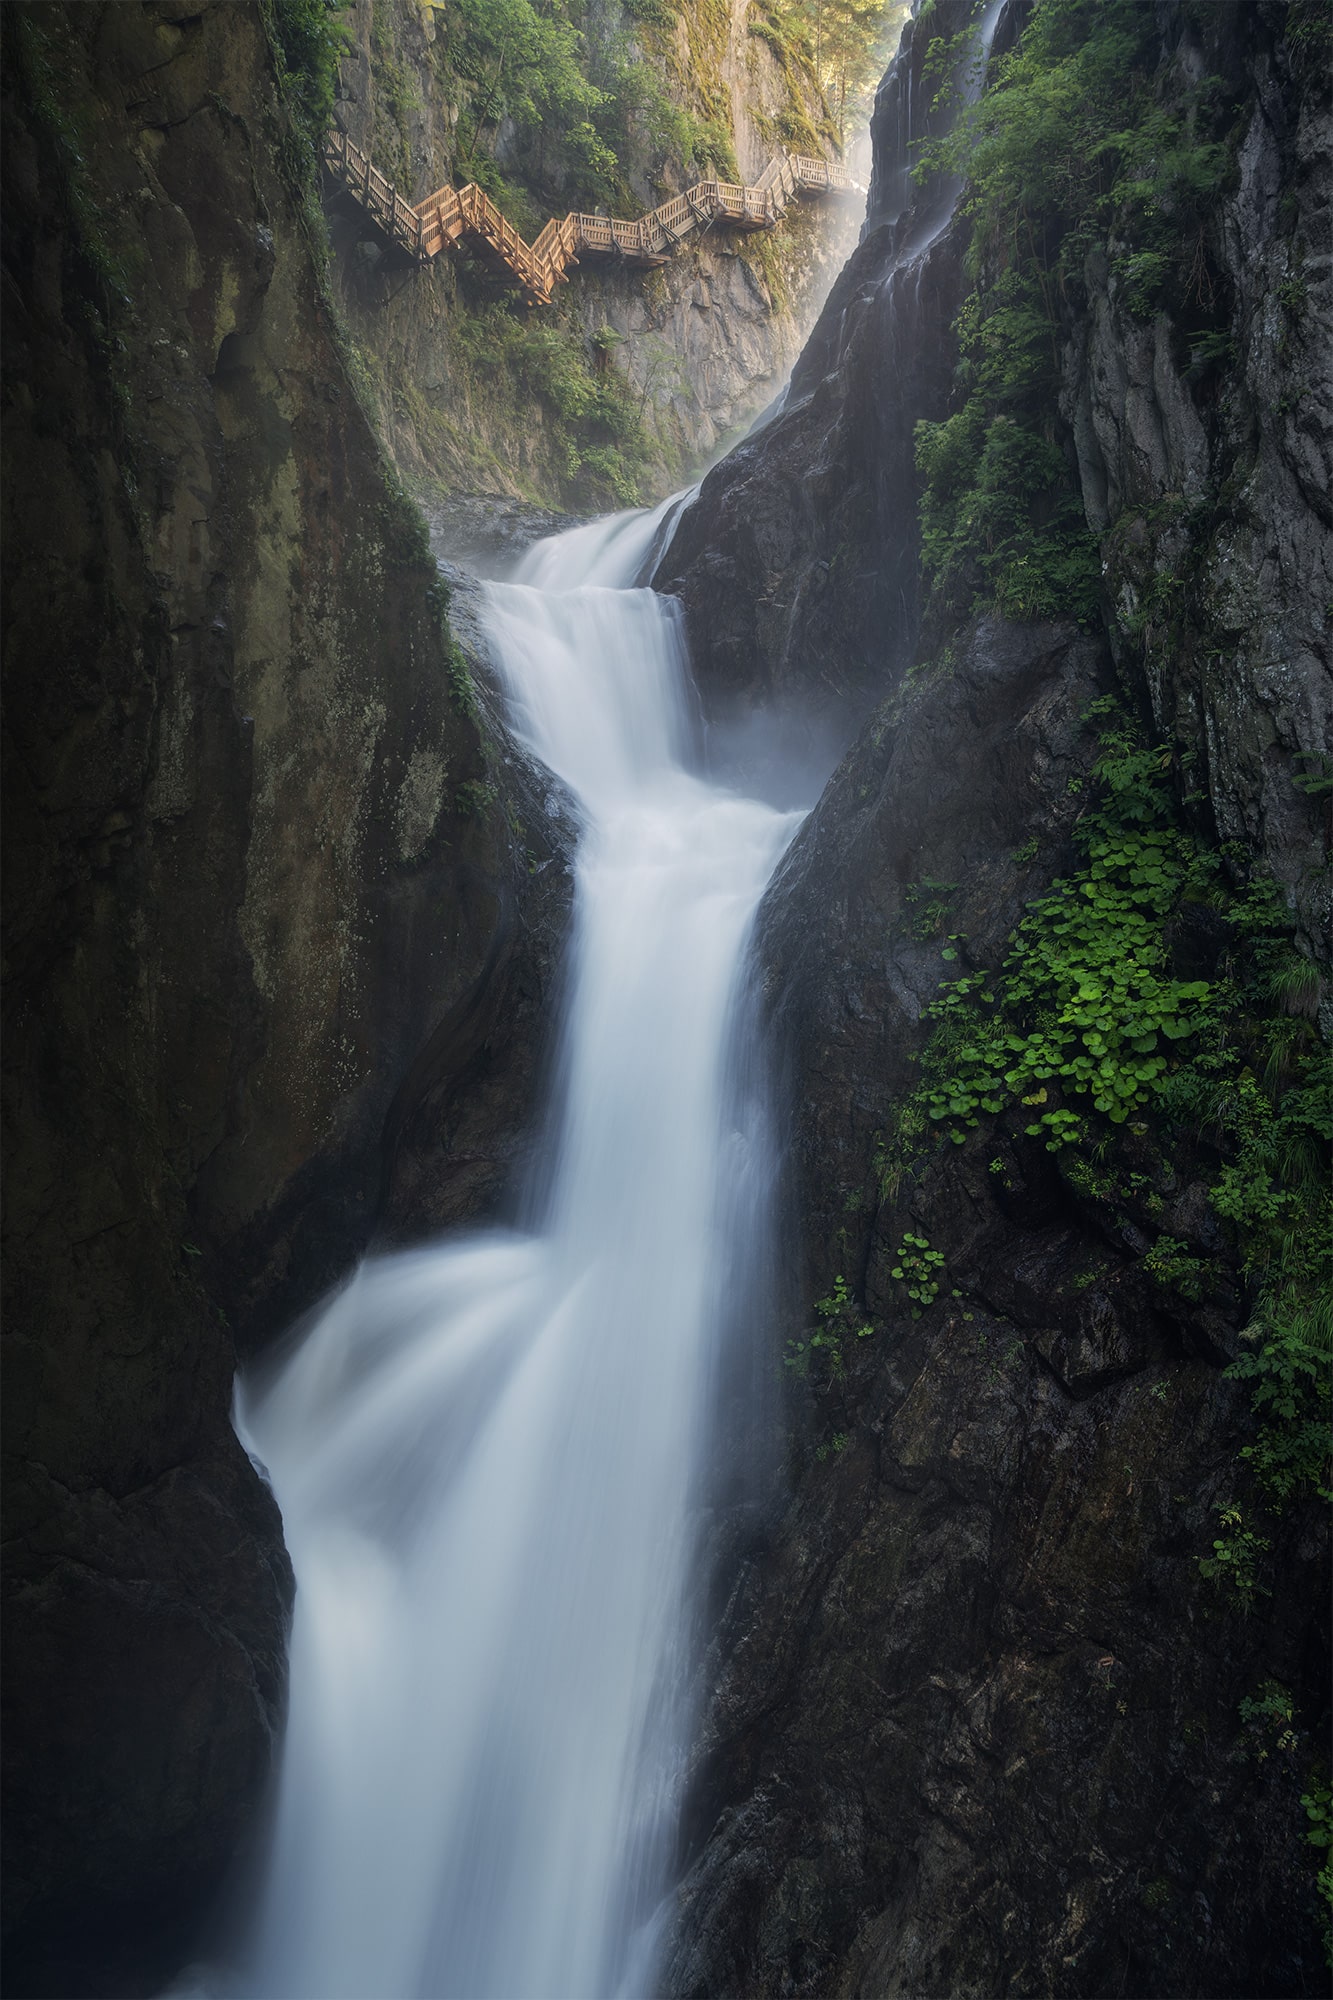 Long exposure shot of a fairytale waterfall cascading in the Gorges du Durnand, Bovernier, Valais, Switzerland. A set of stairs appears to lead to heaven above the waterfall. Captured with a Nikon Z8.